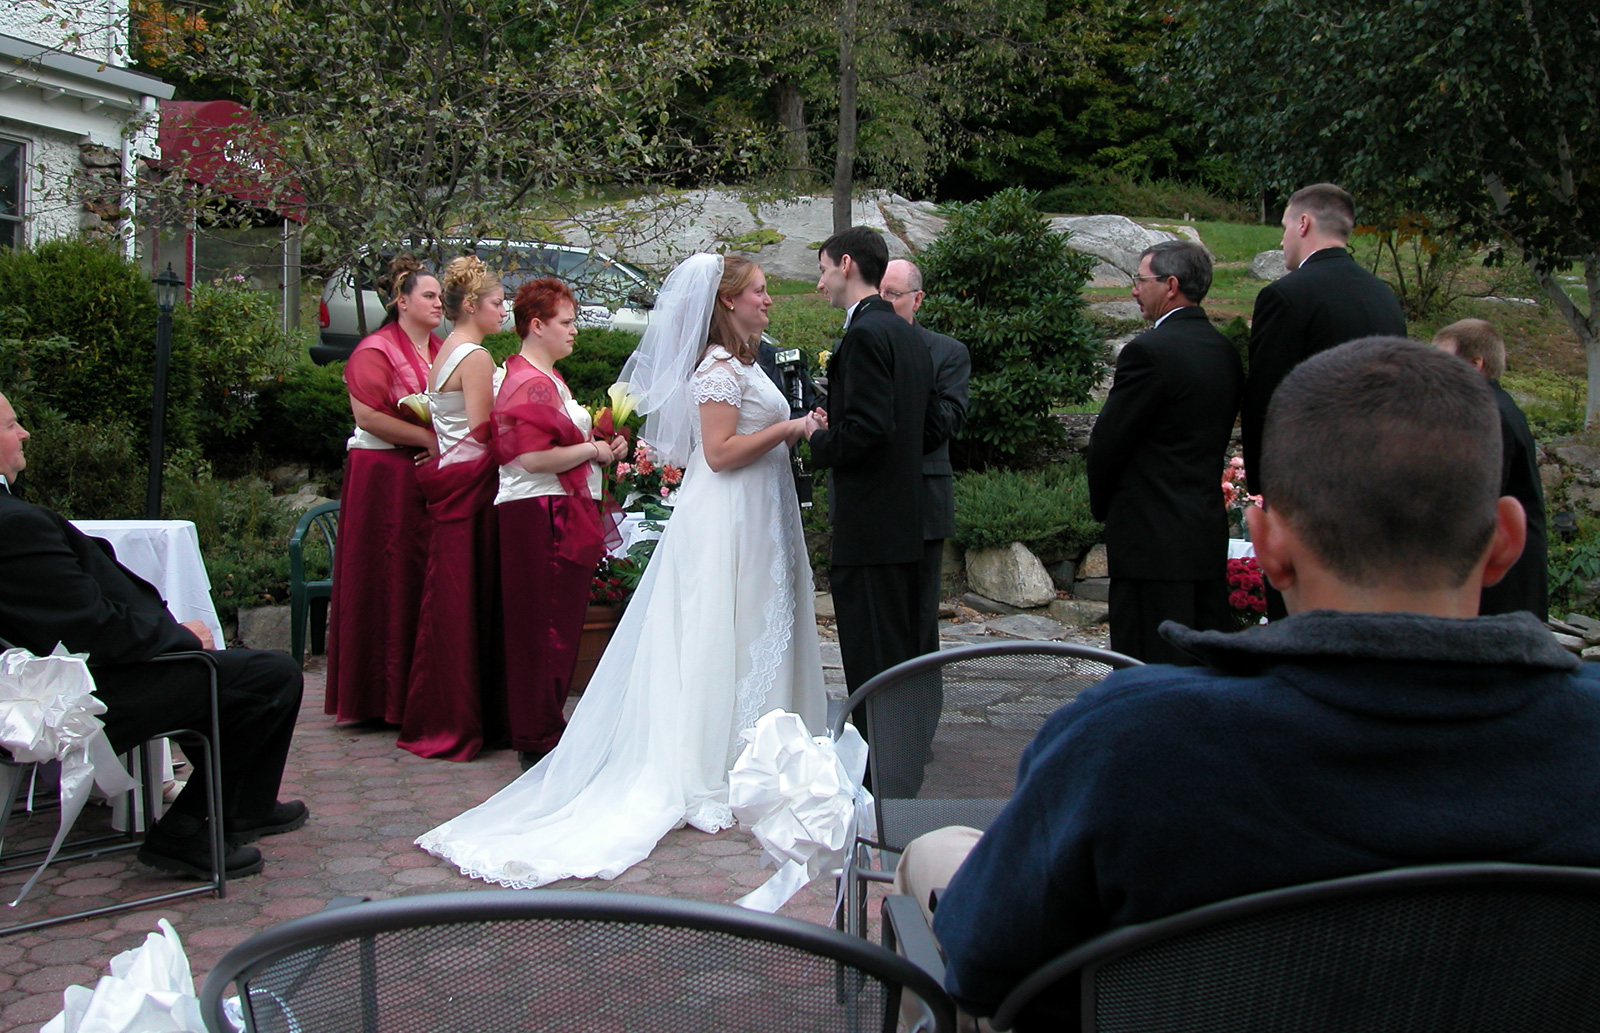 Melissa and David reciting their wedding vows